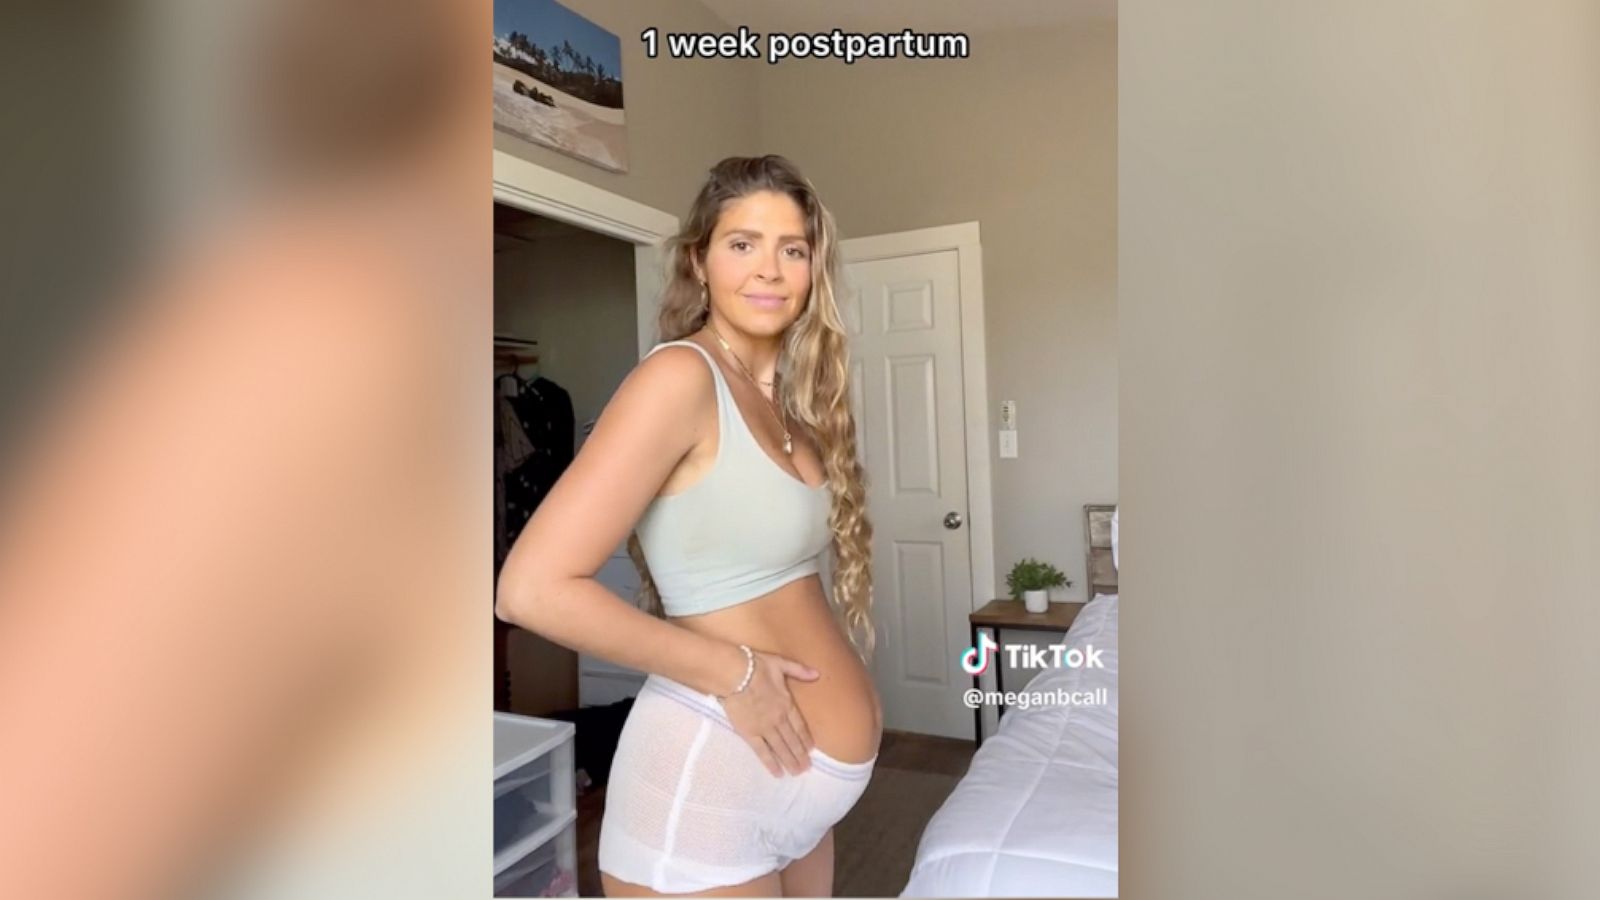 Mom goes viral sharing reality of her postpartum body - ABC News